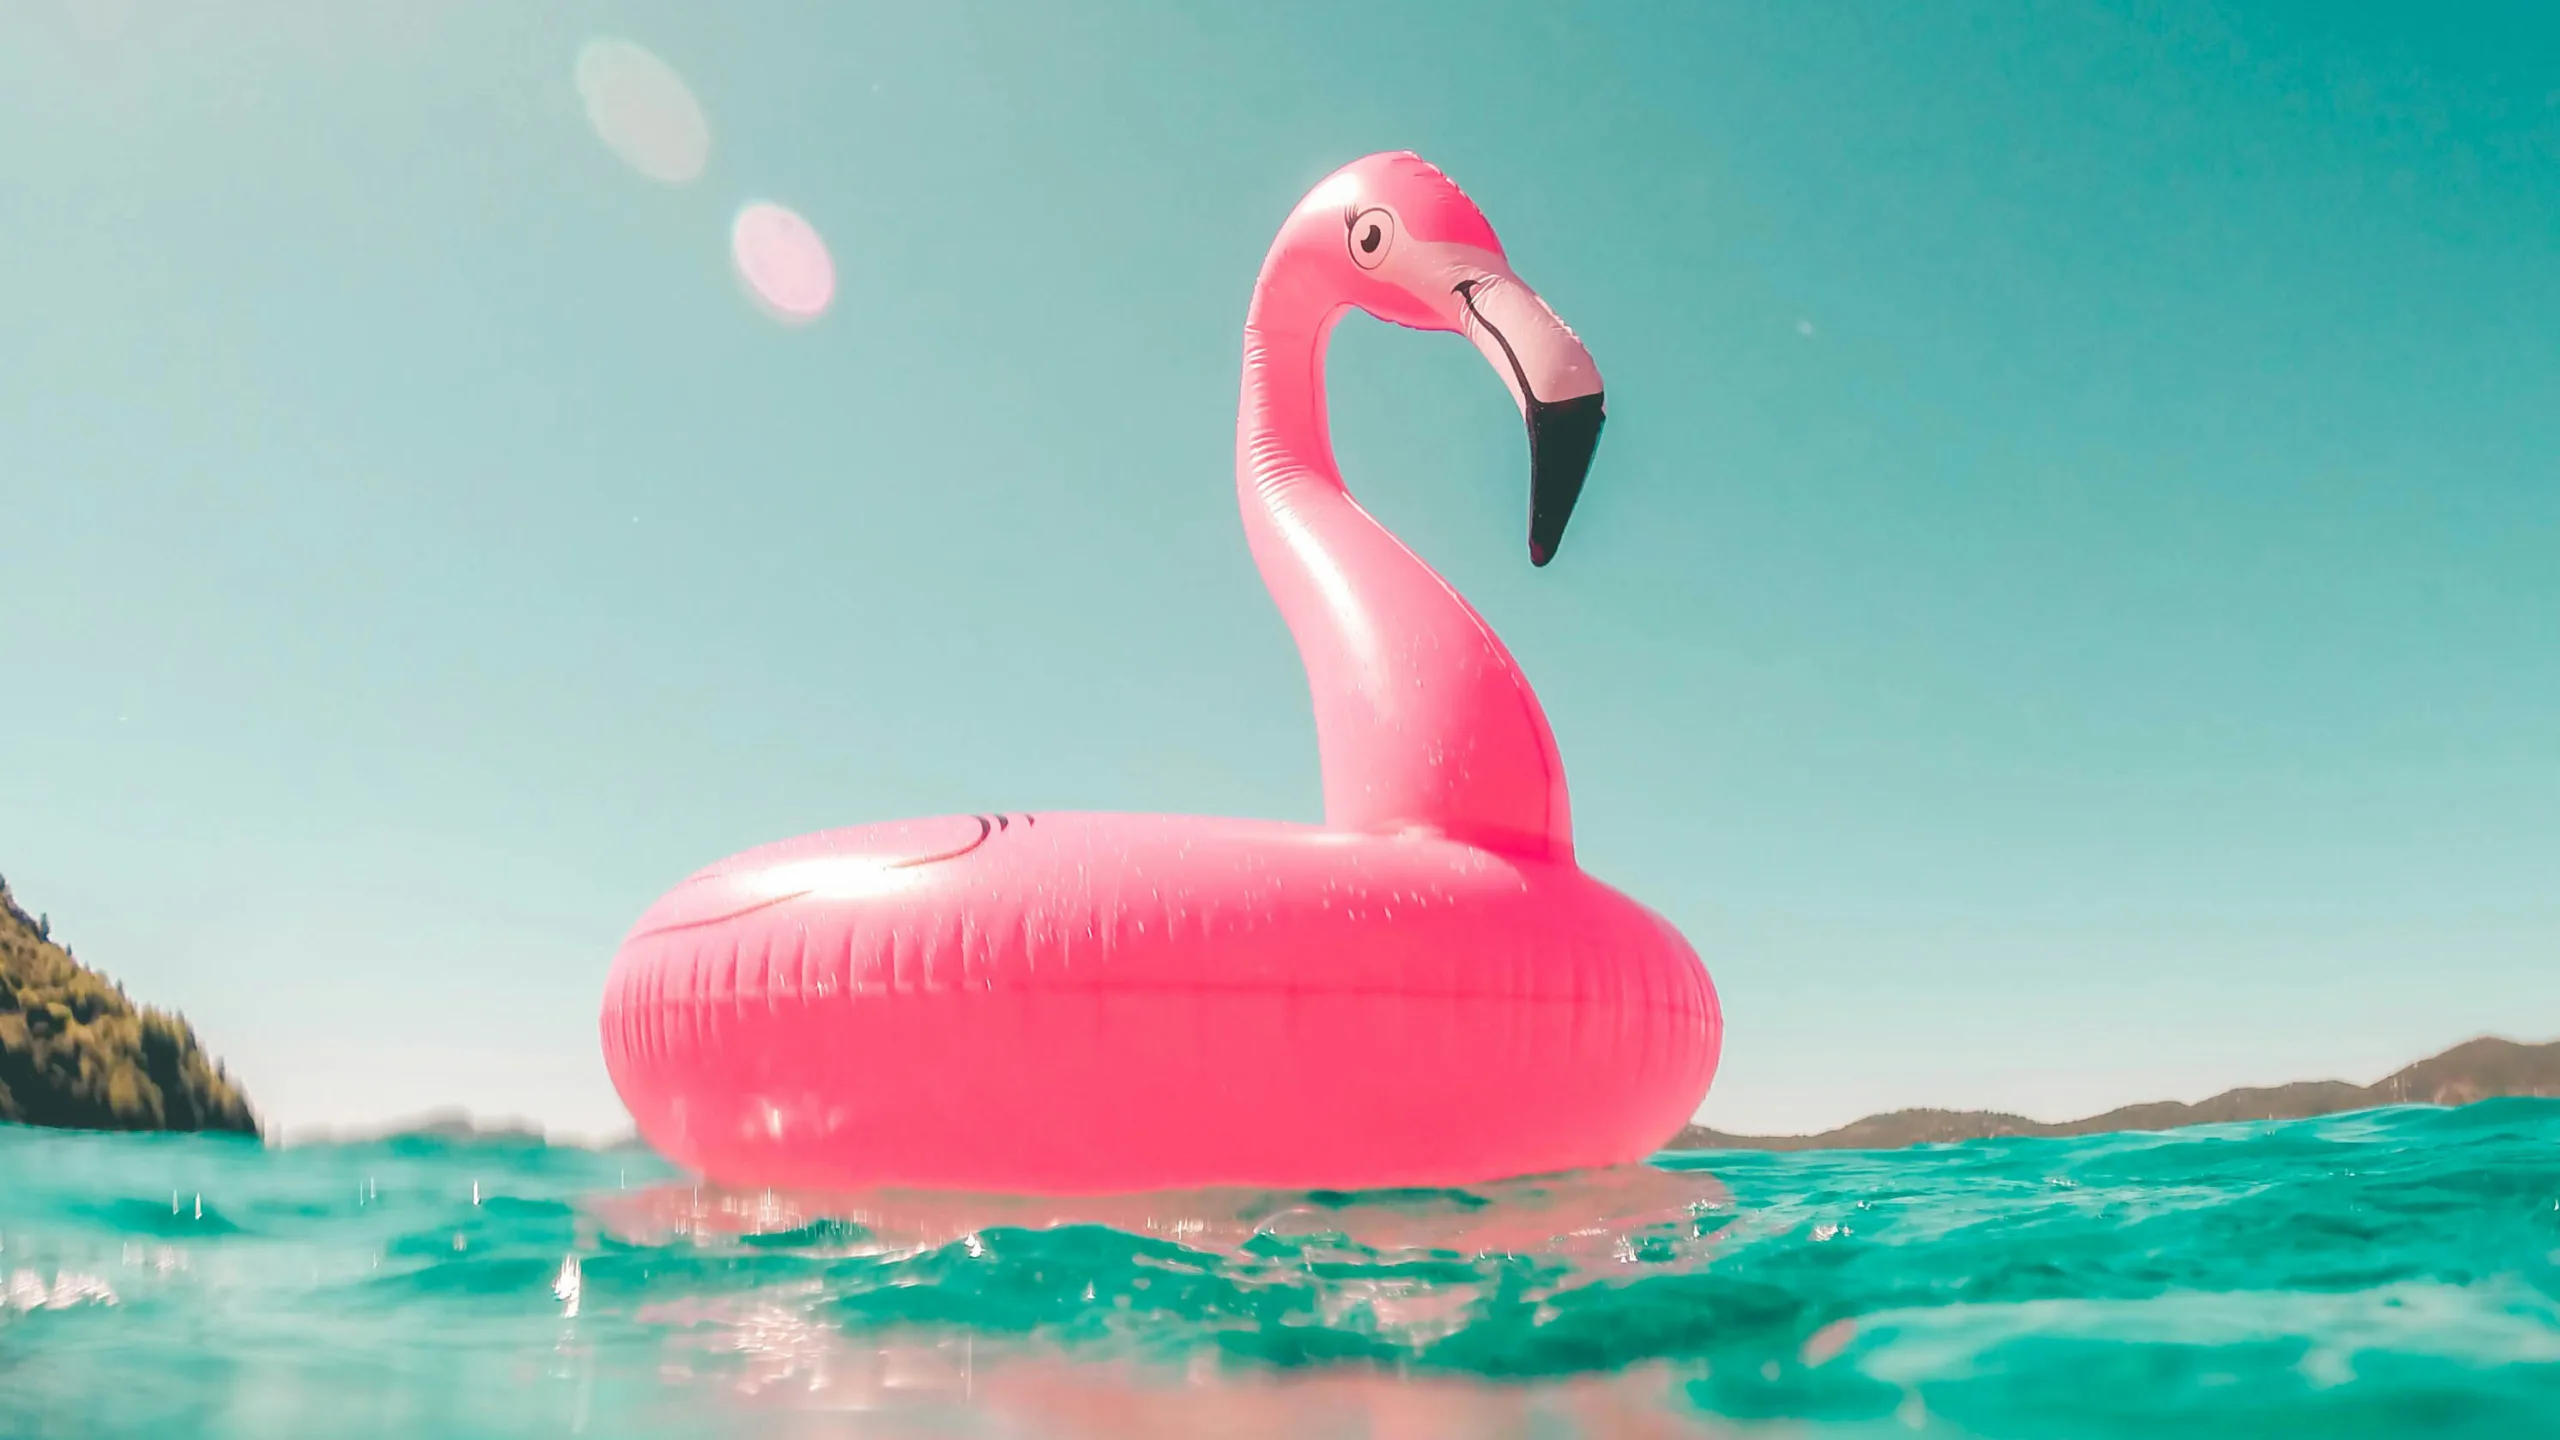 A photograph of an inflatable pink flamingo on water